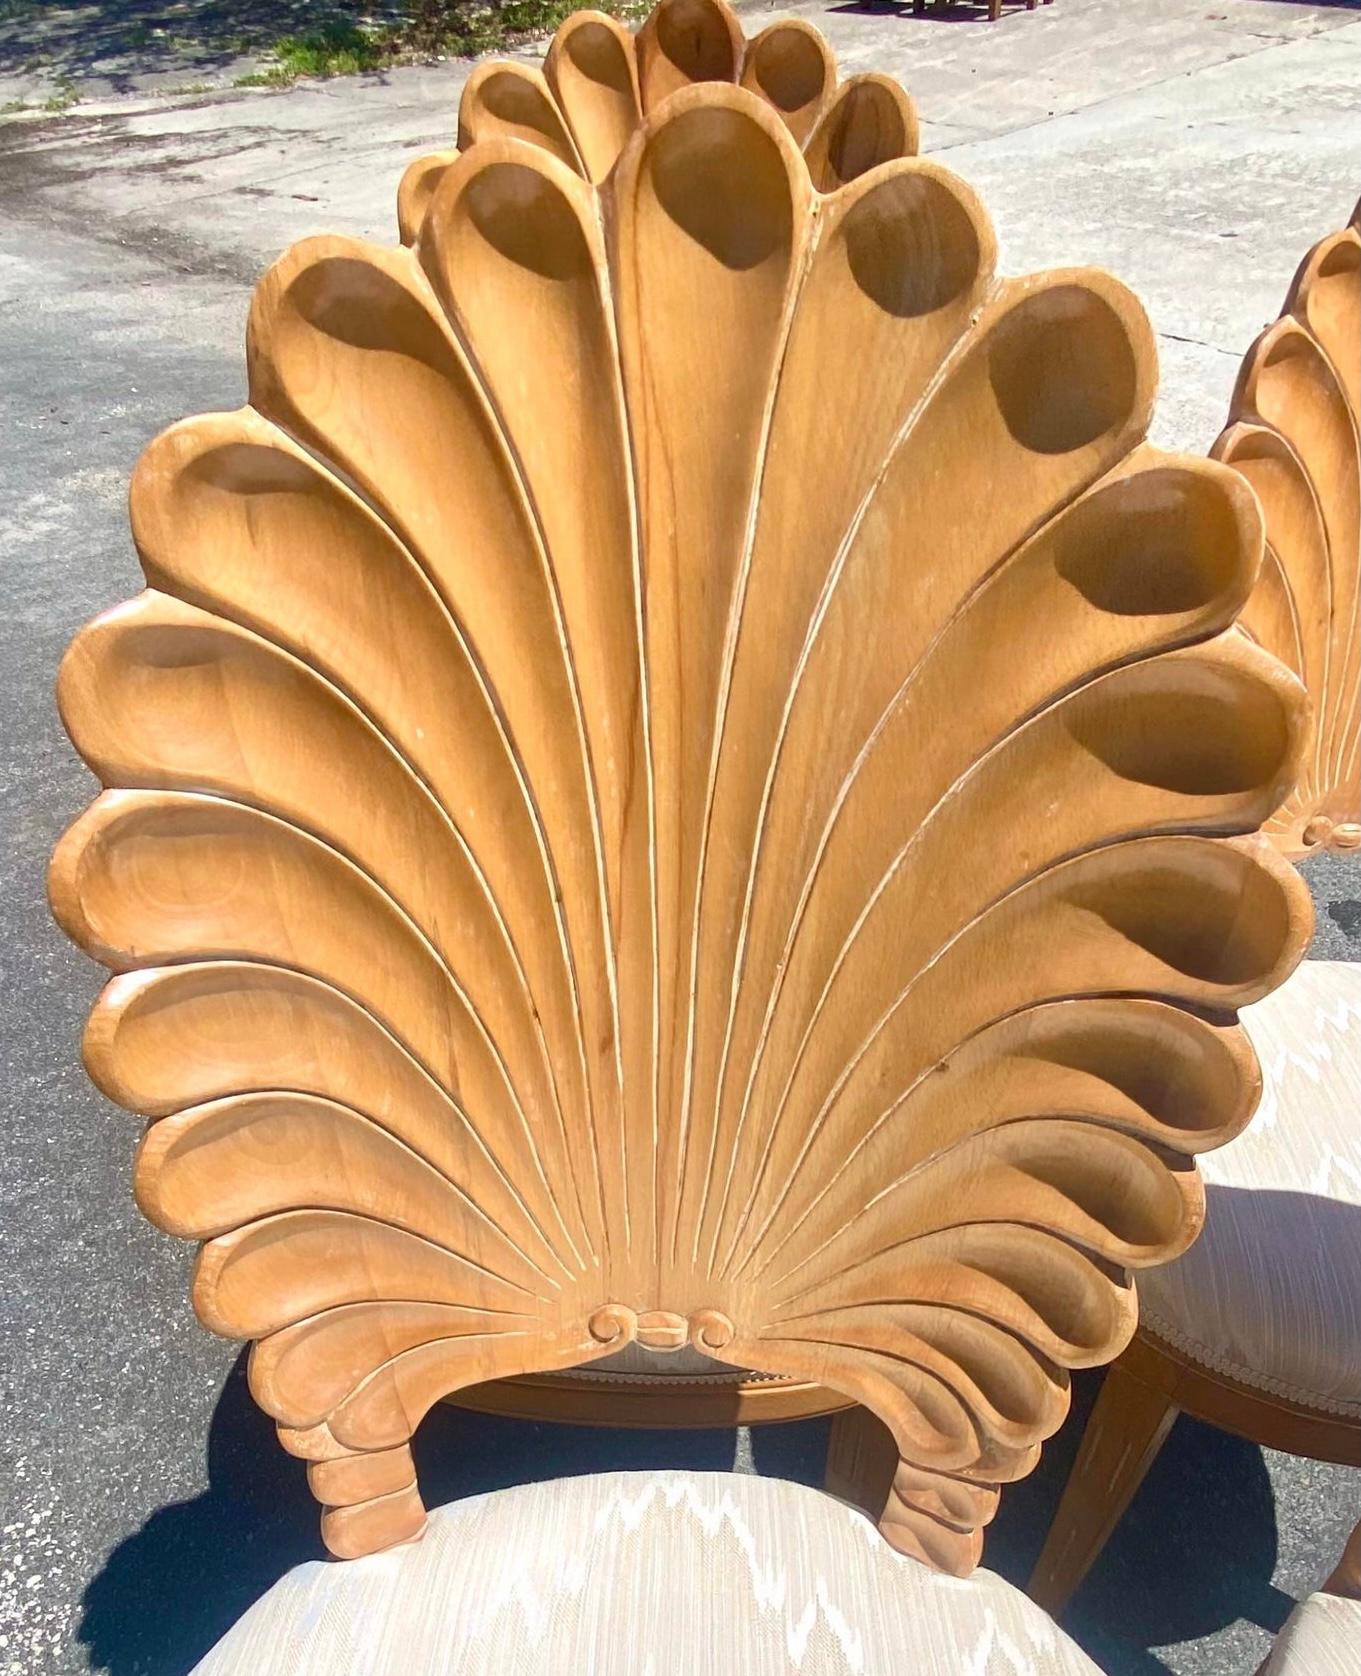 Fantastic set of carved grotto chairs. Beautiful Cerused finish on an iconic carved design. Perfect as dining chairs or with a game table. Acquired from a Palm Beach estate.